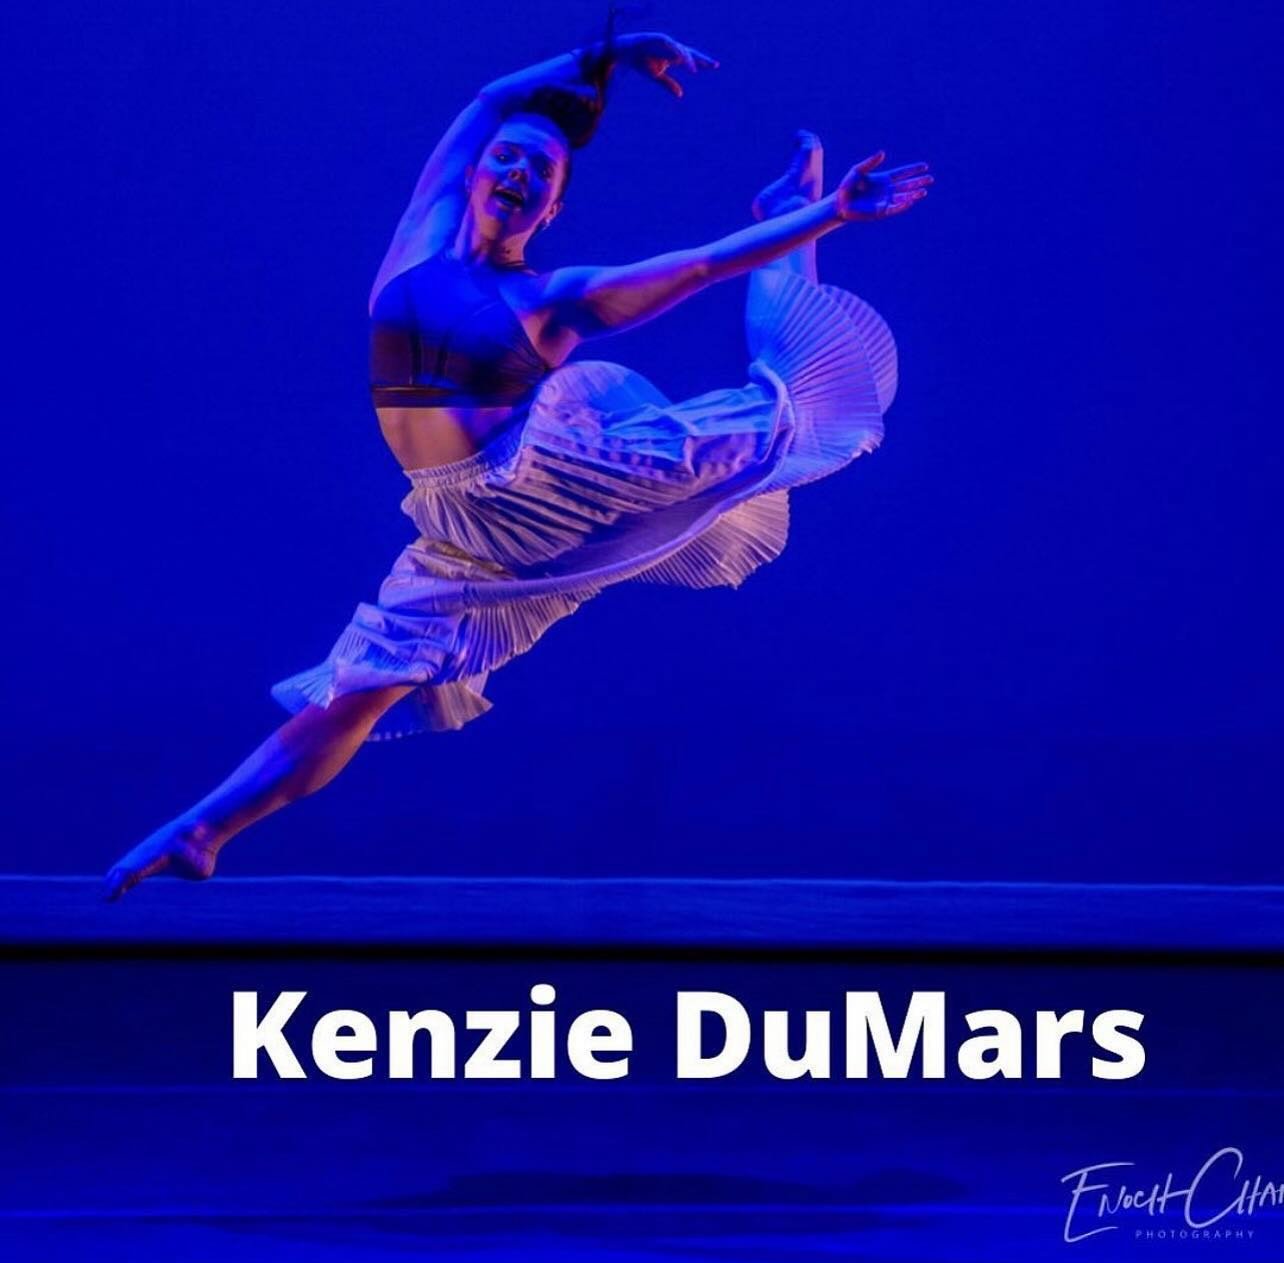 Kenzie DuMars is a very special dancer to me. Not only is she exceptionally talented, she is also a very caring young woman. &nbsp;She has won numerous national dance awards.&nbsp; Kenzie&rsquo;s dancing and choreographies are very powerful and movin